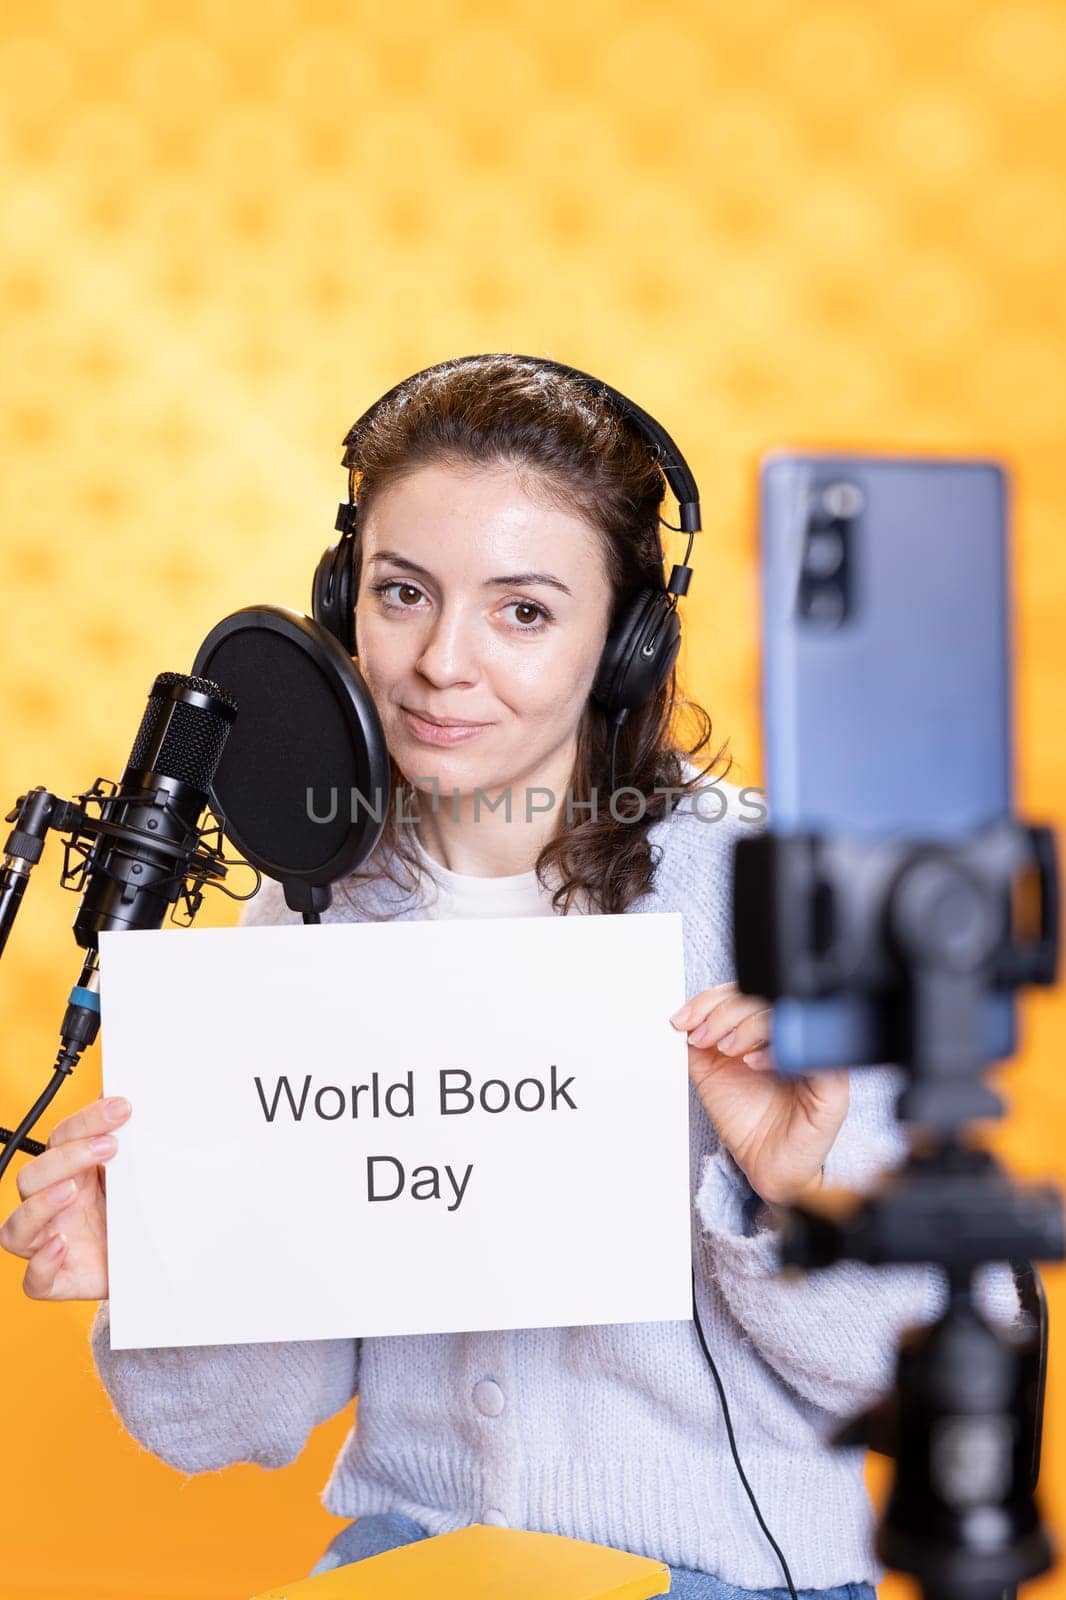 Content creator promoting reading during world book day, studio background by DCStudio